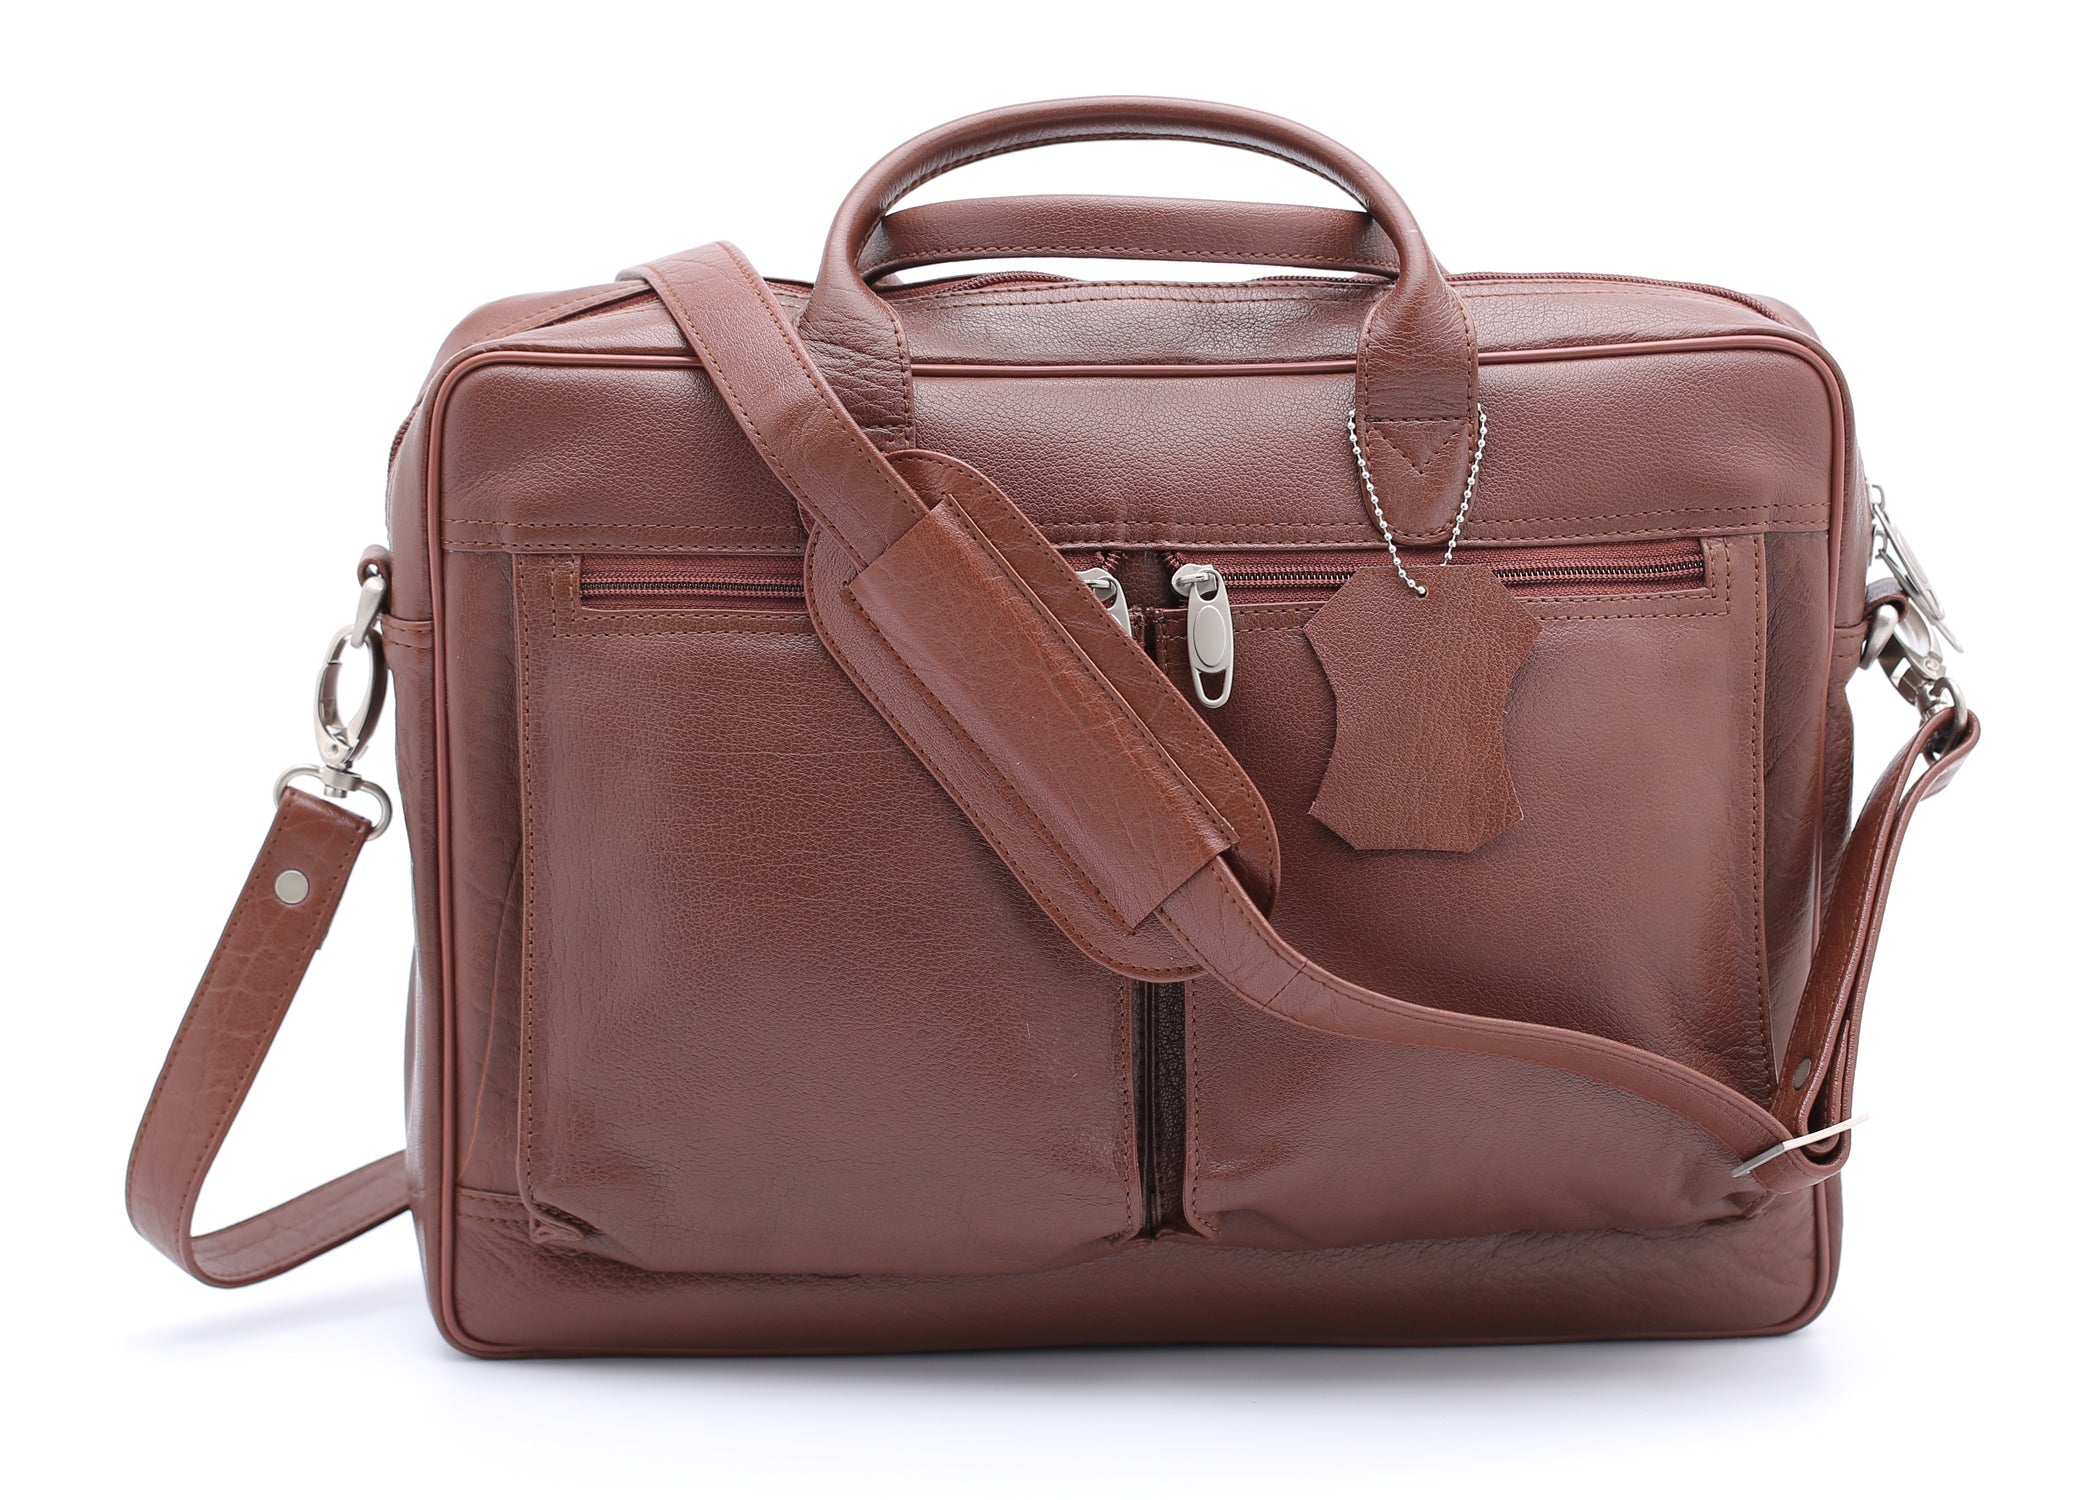 The Ultimate Tan Leather Briefcase Bag